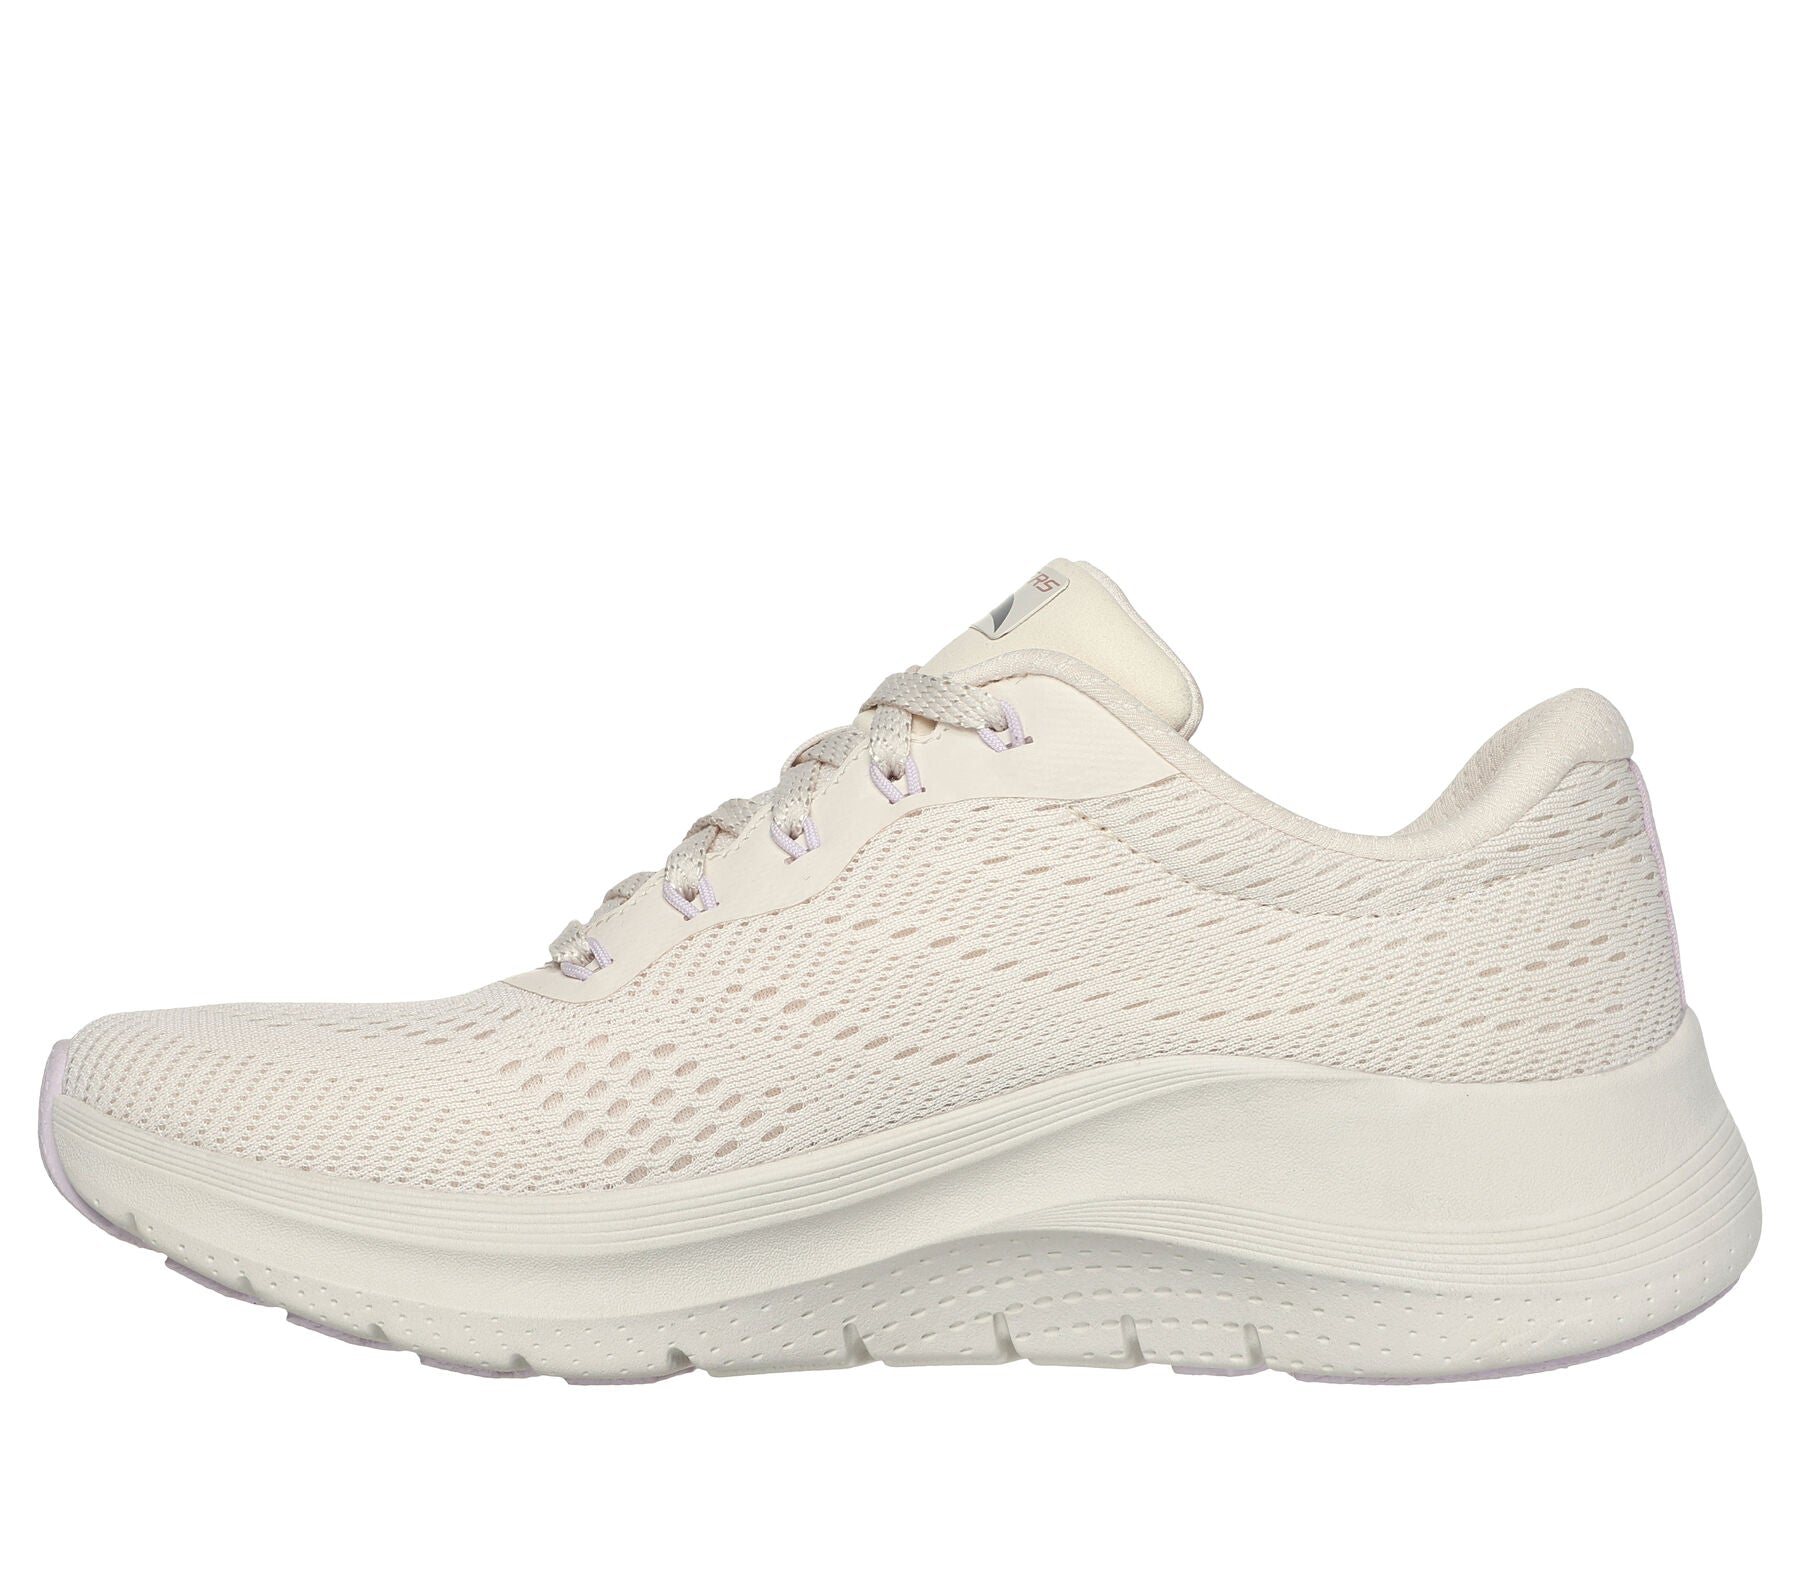 Skechers Arch Fit® 2.0 - Big League: Men's Supportive Sneakers